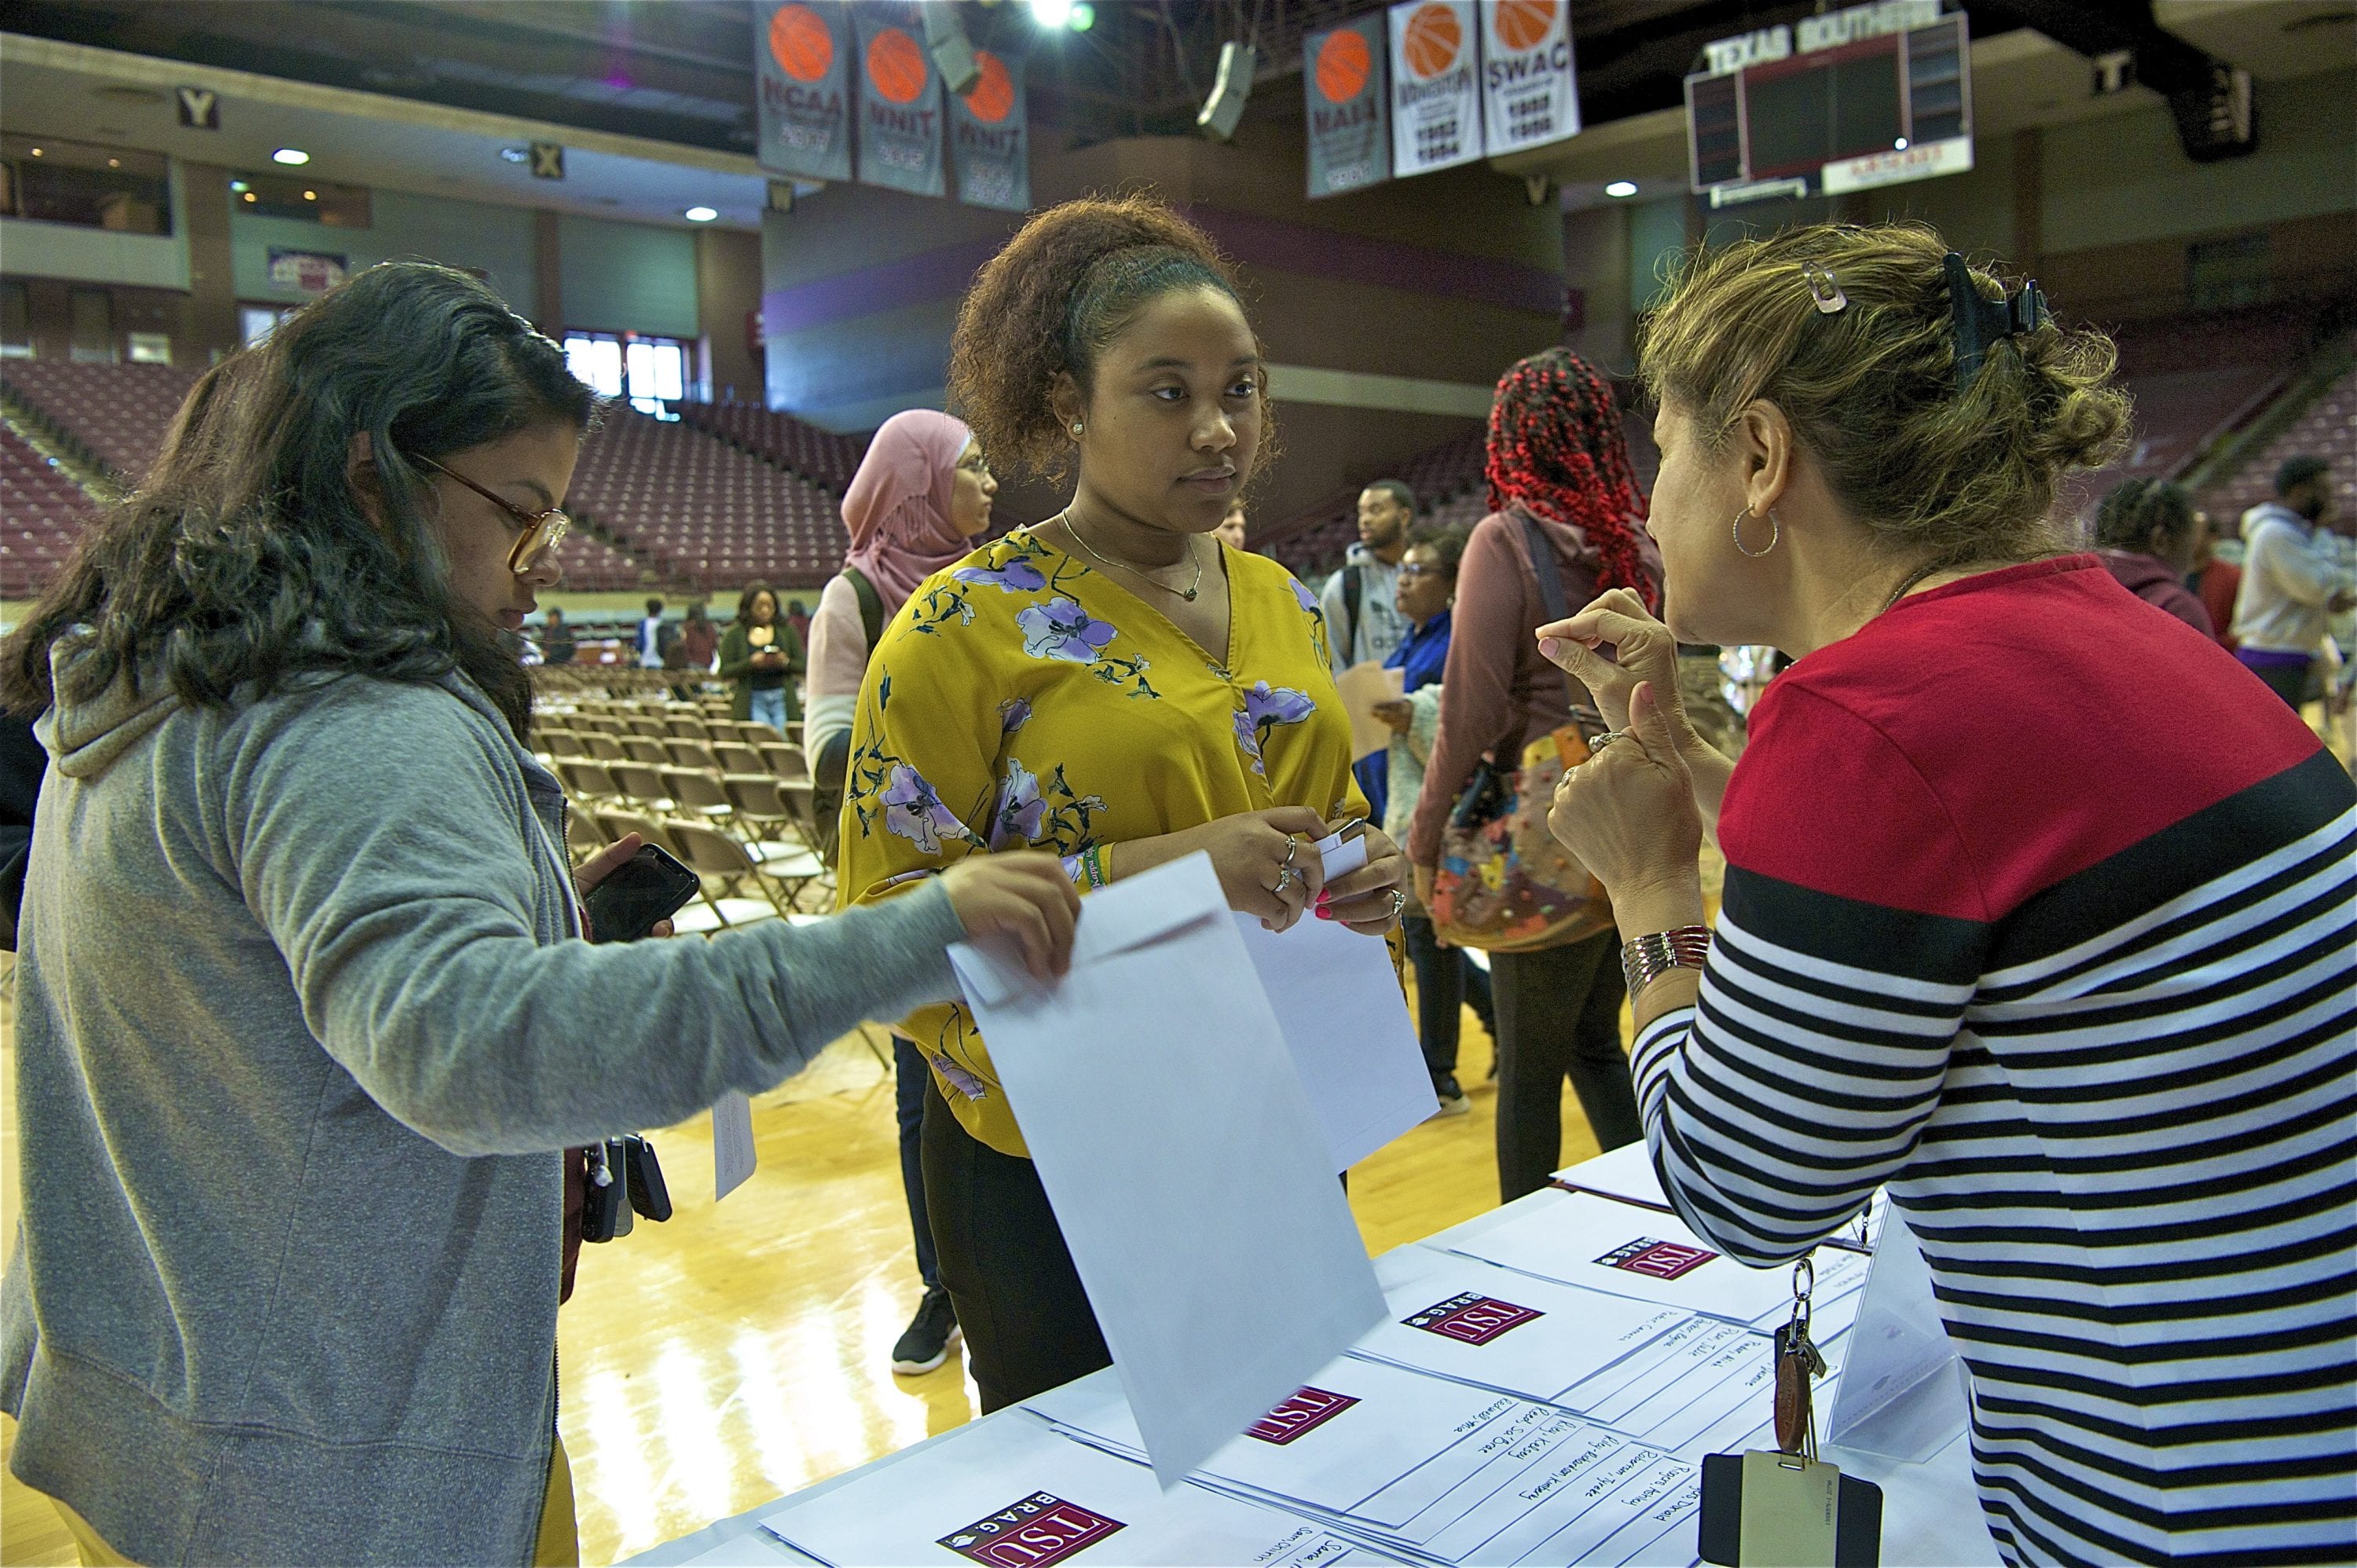 Texas Southern University Hosts Inaugural B.R.A.G. event